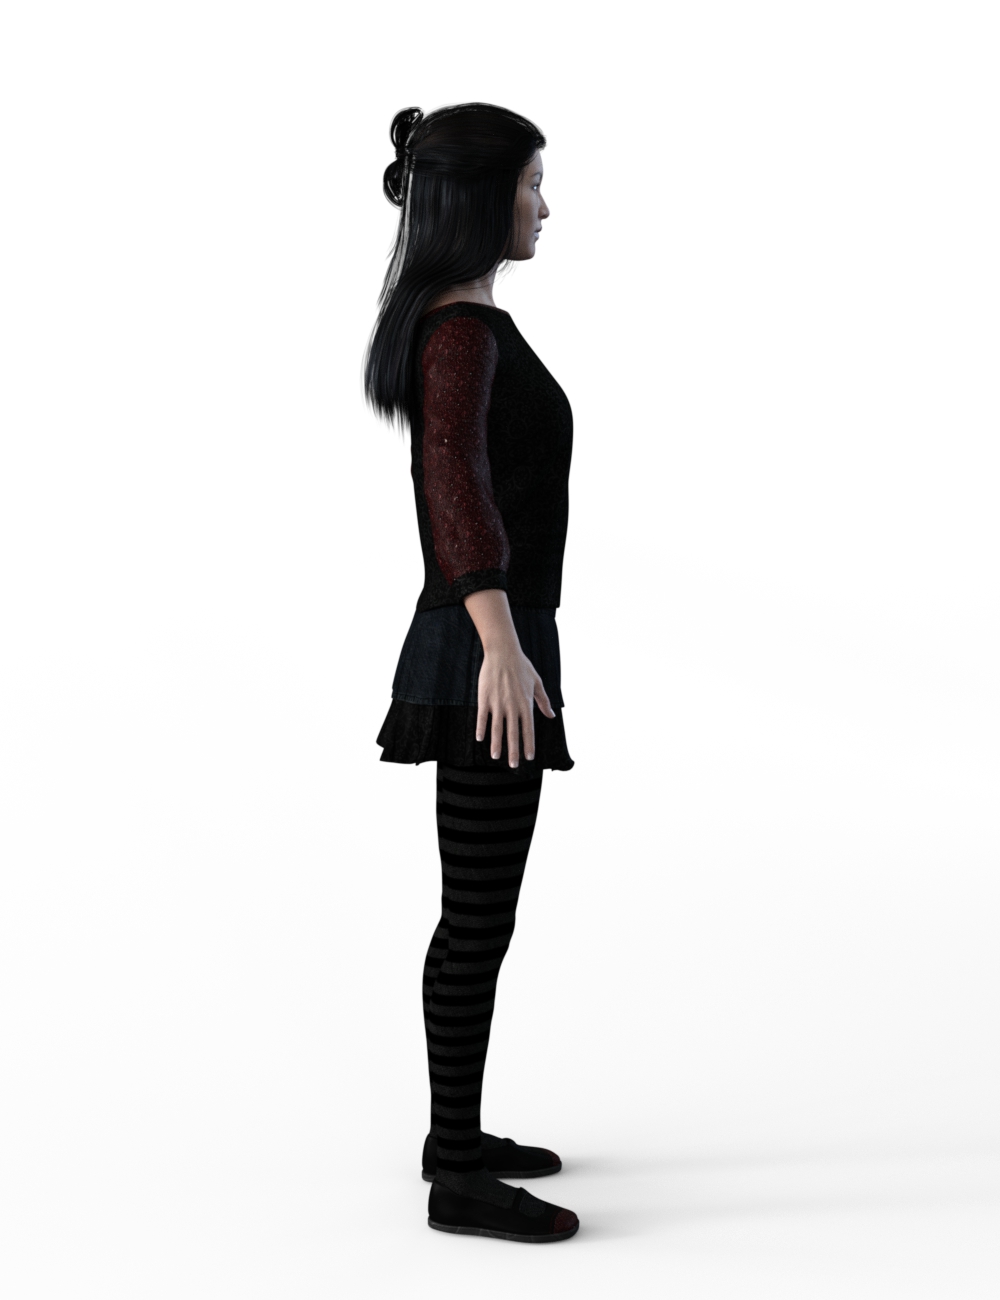 FBX- Mei Lin Childs Play Outfit by: Paleo, 3D Models by Daz 3D